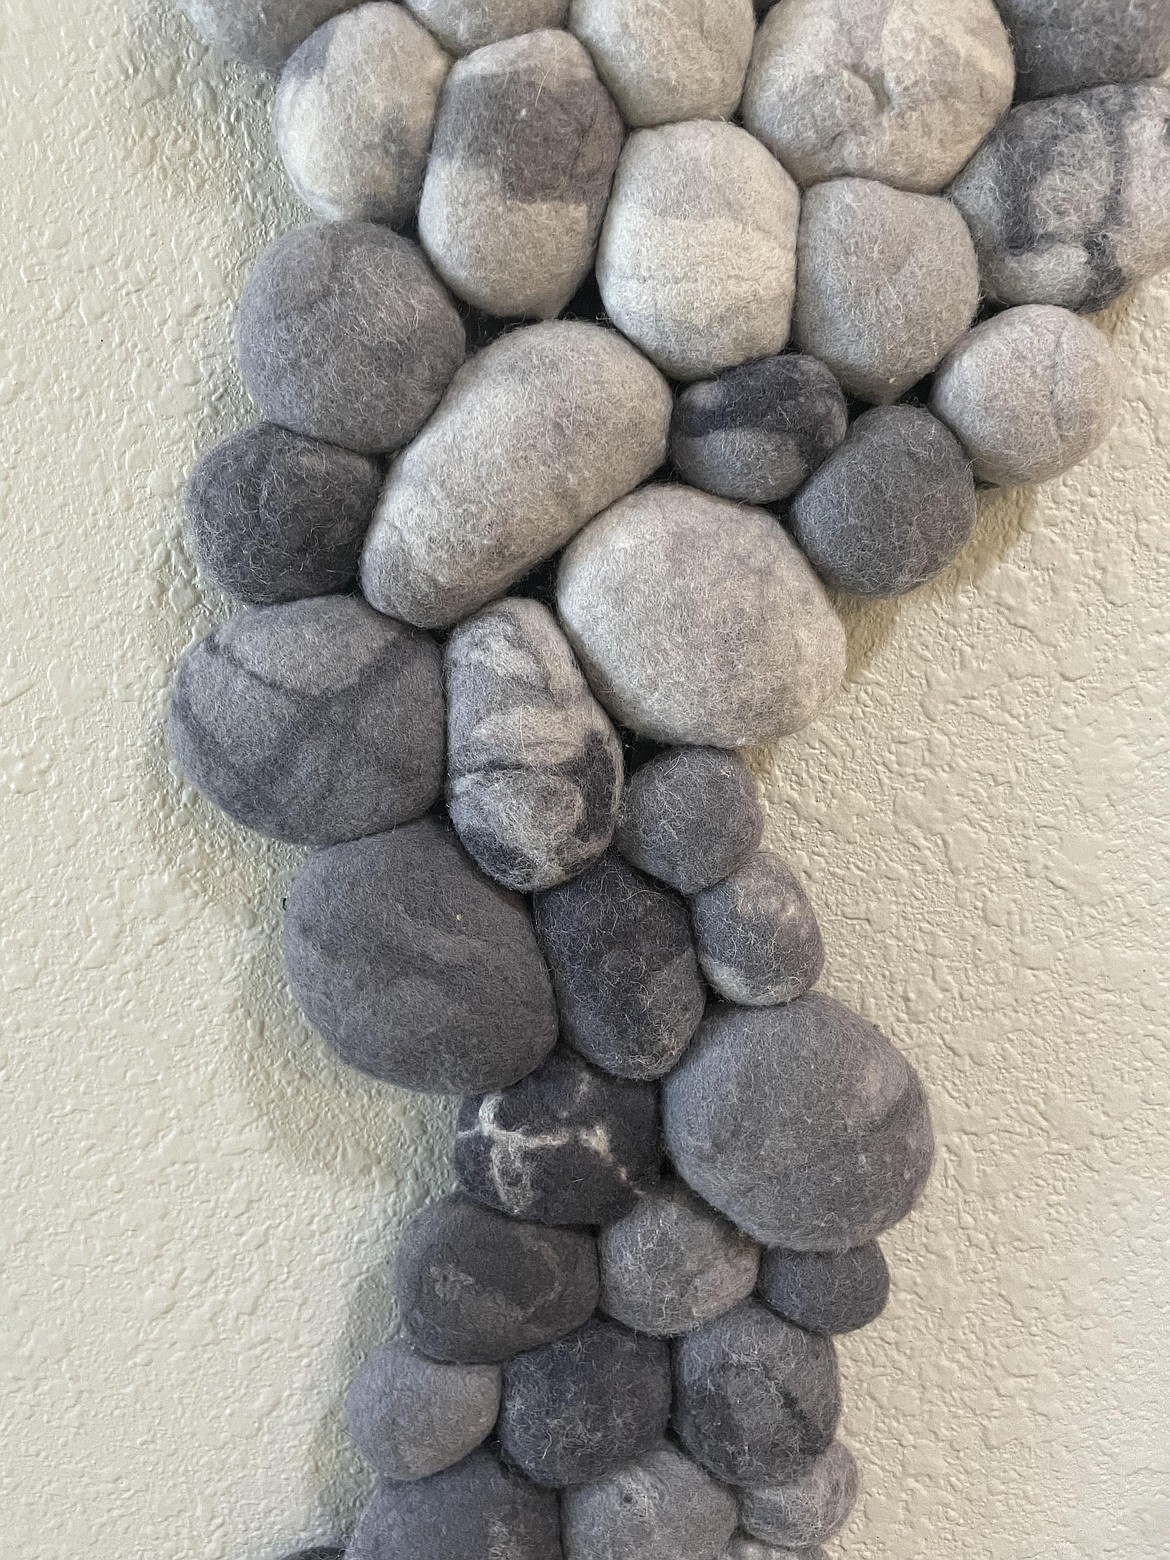 A portion of Ron Ulrich’s creation “River Rock,” a collection of solid felt balls made to look like rocks on the bed of a mountain stream.